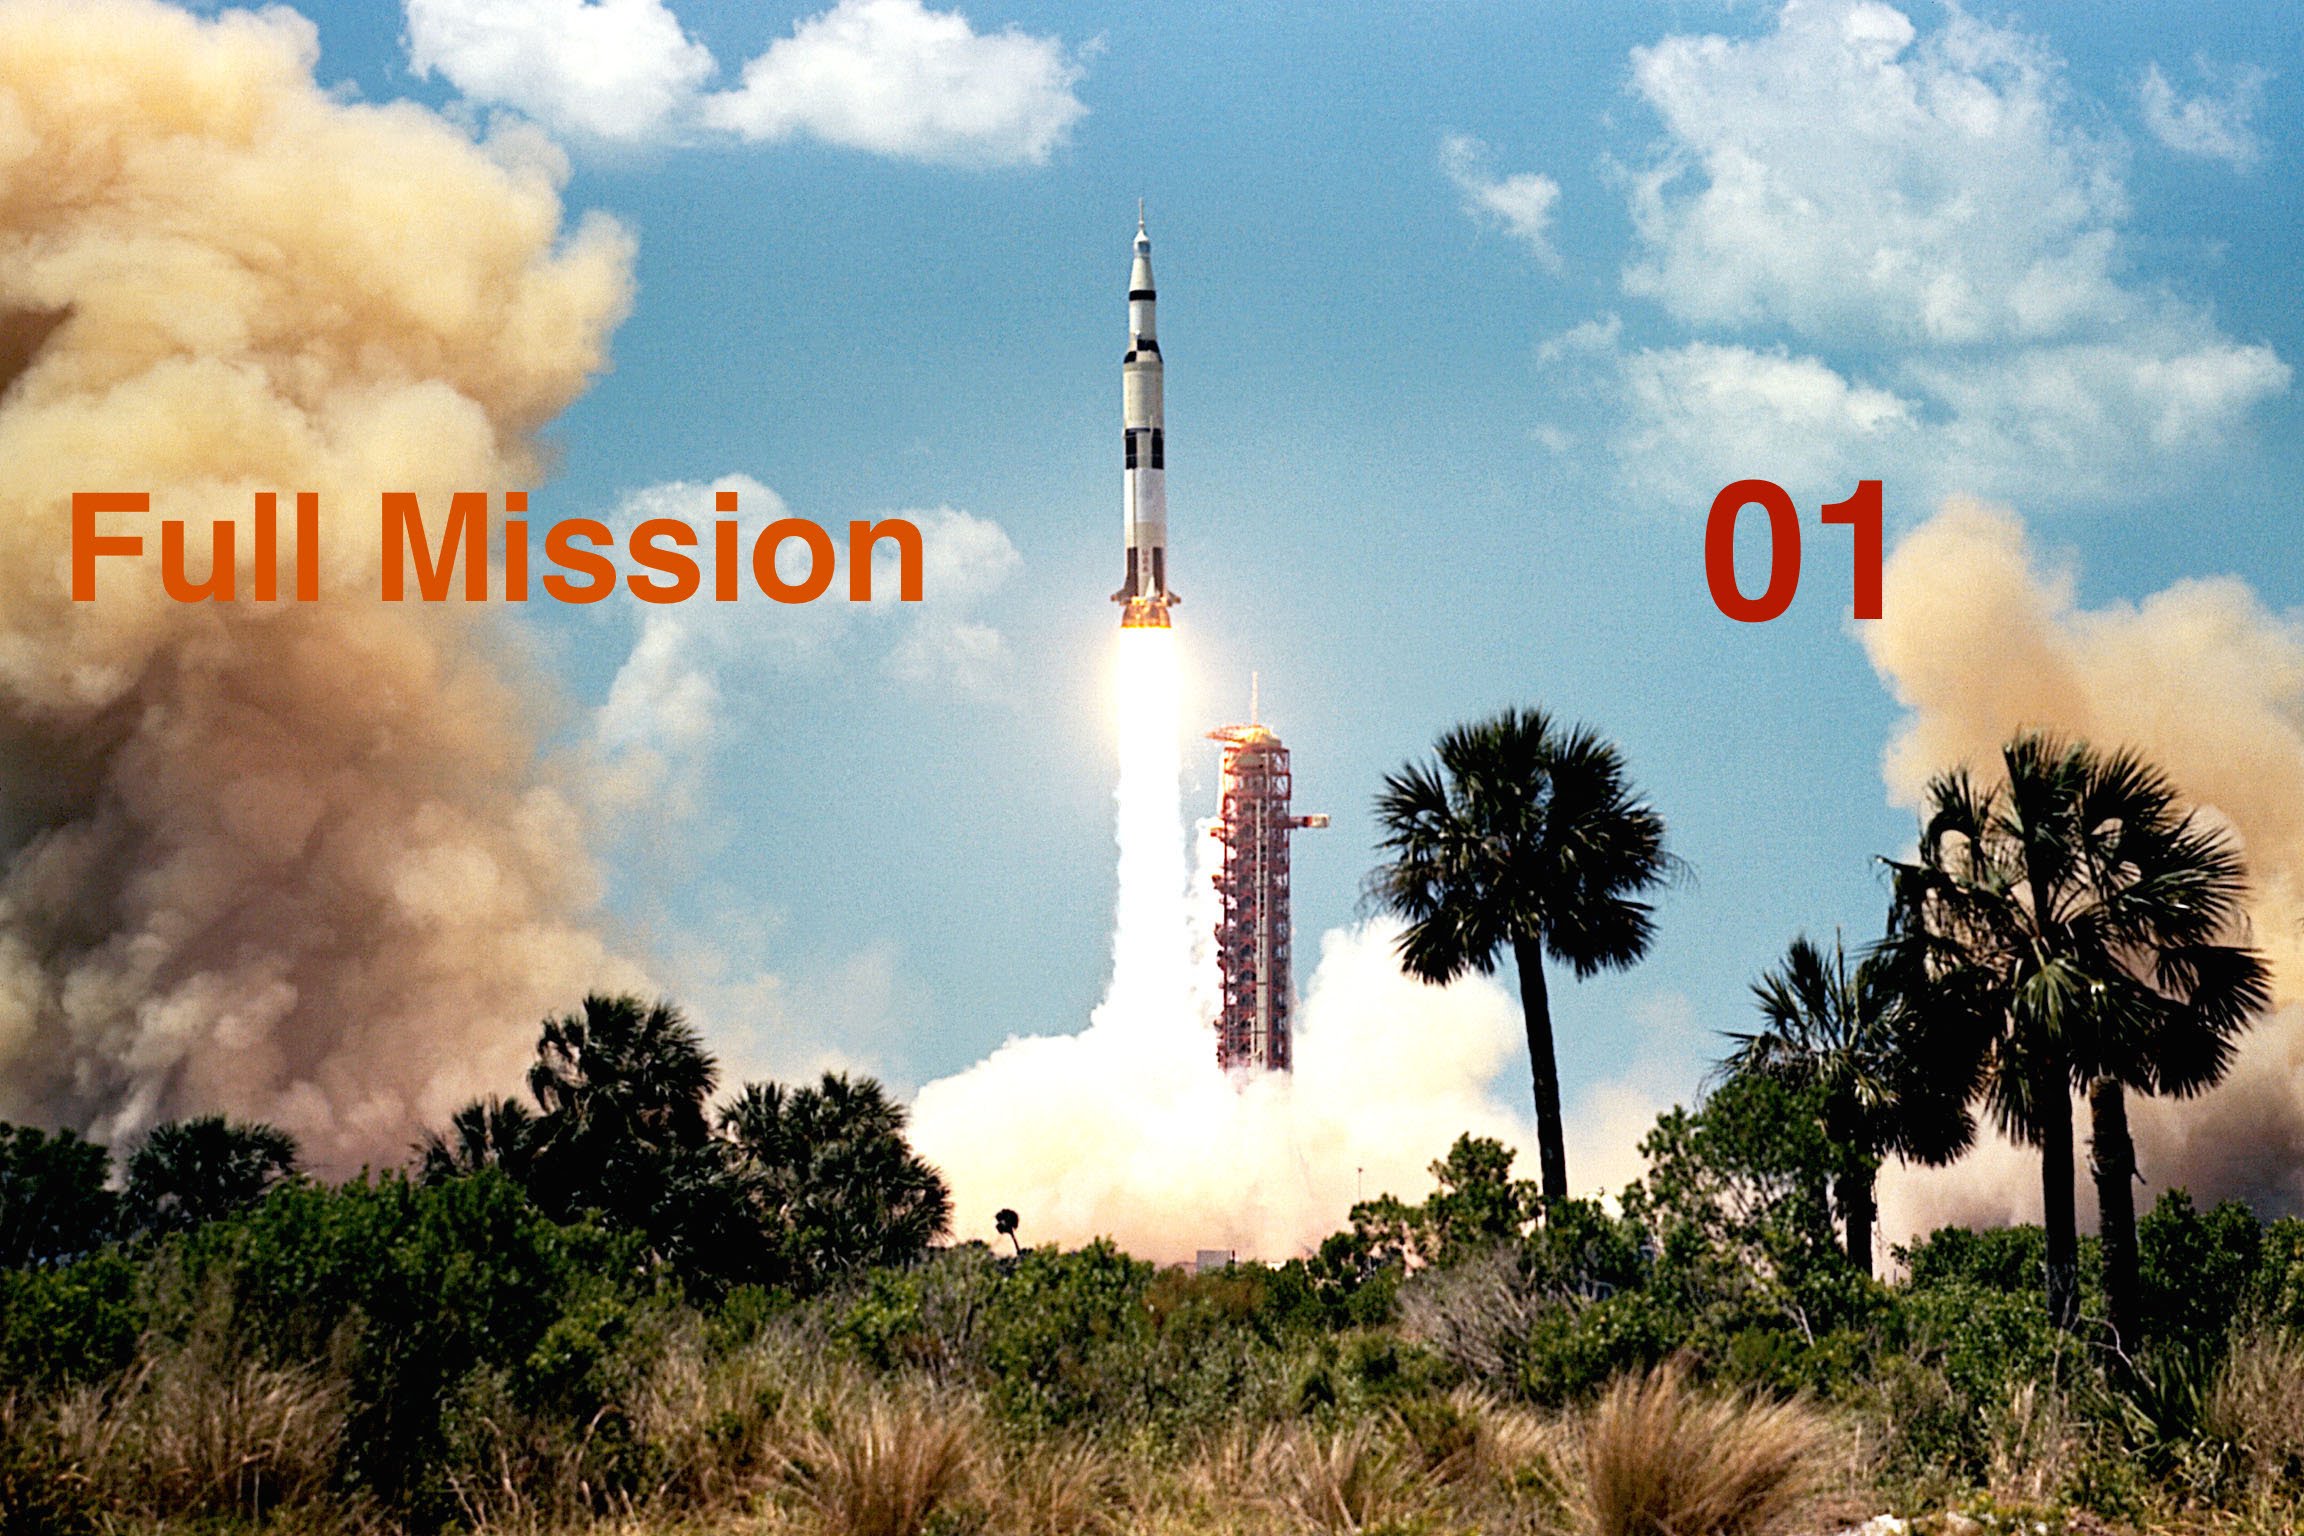 Apollo 16 - The Launch (Full Mission 01) - YouTube